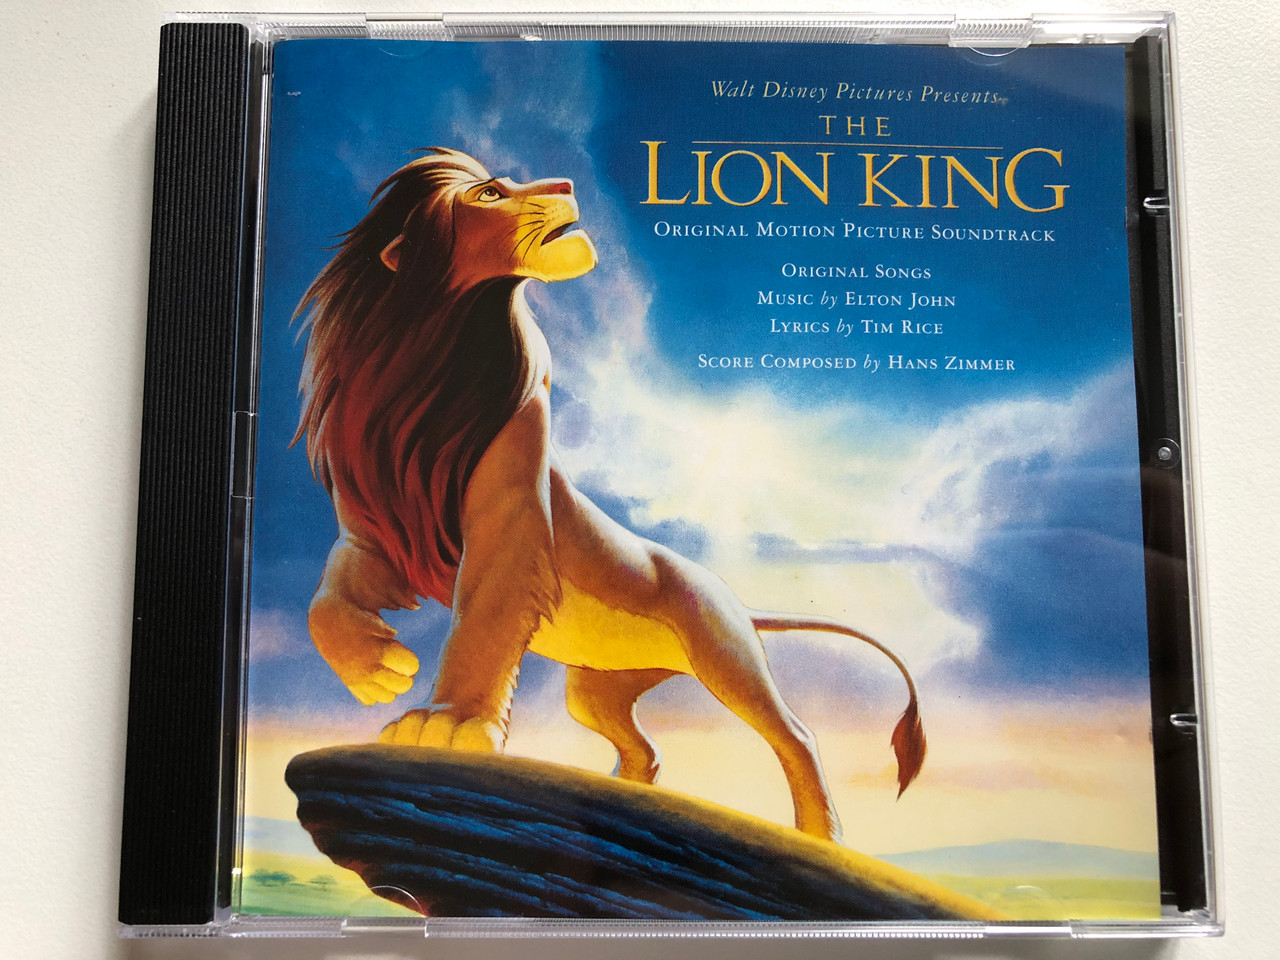 https://cdn10.bigcommerce.com/s-62bdpkt7pb/products/0/images/313996/The_Lion_King_Original_Motion_Picture_Soundtrack_-_Original_Songs_Music_By_Elton_John_Lyrics_by_Tim_Rice_Score_Composed_by_Hans_Zimmer_Walt_Disney_Records_Audio_CD_1994_74321214222_1__92330.1701245315.1280.1280.JPG?c=2